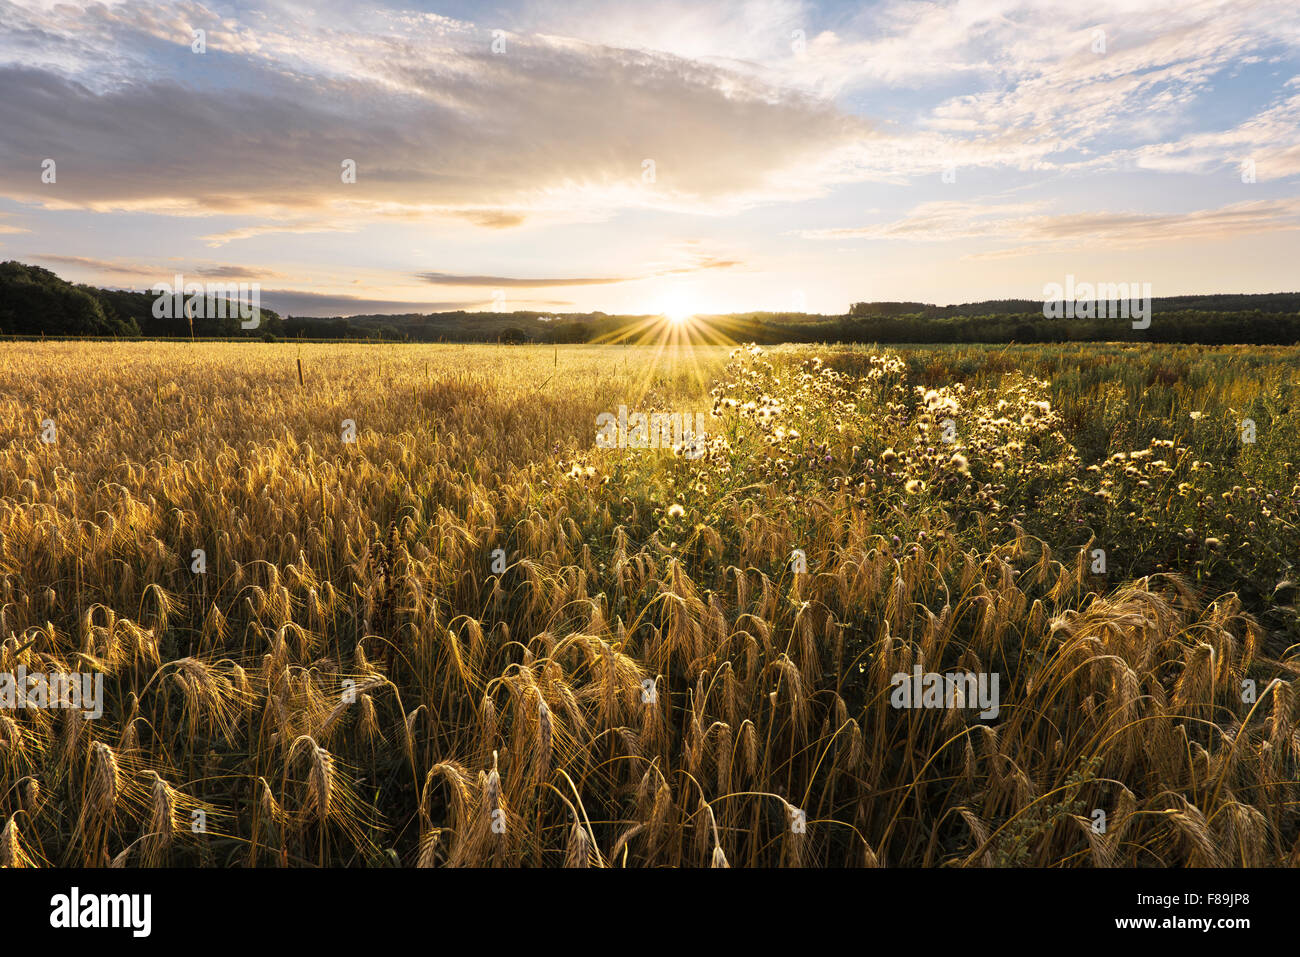 Cornfield, souabe bavaria, Germany, Europe Banque D'Images